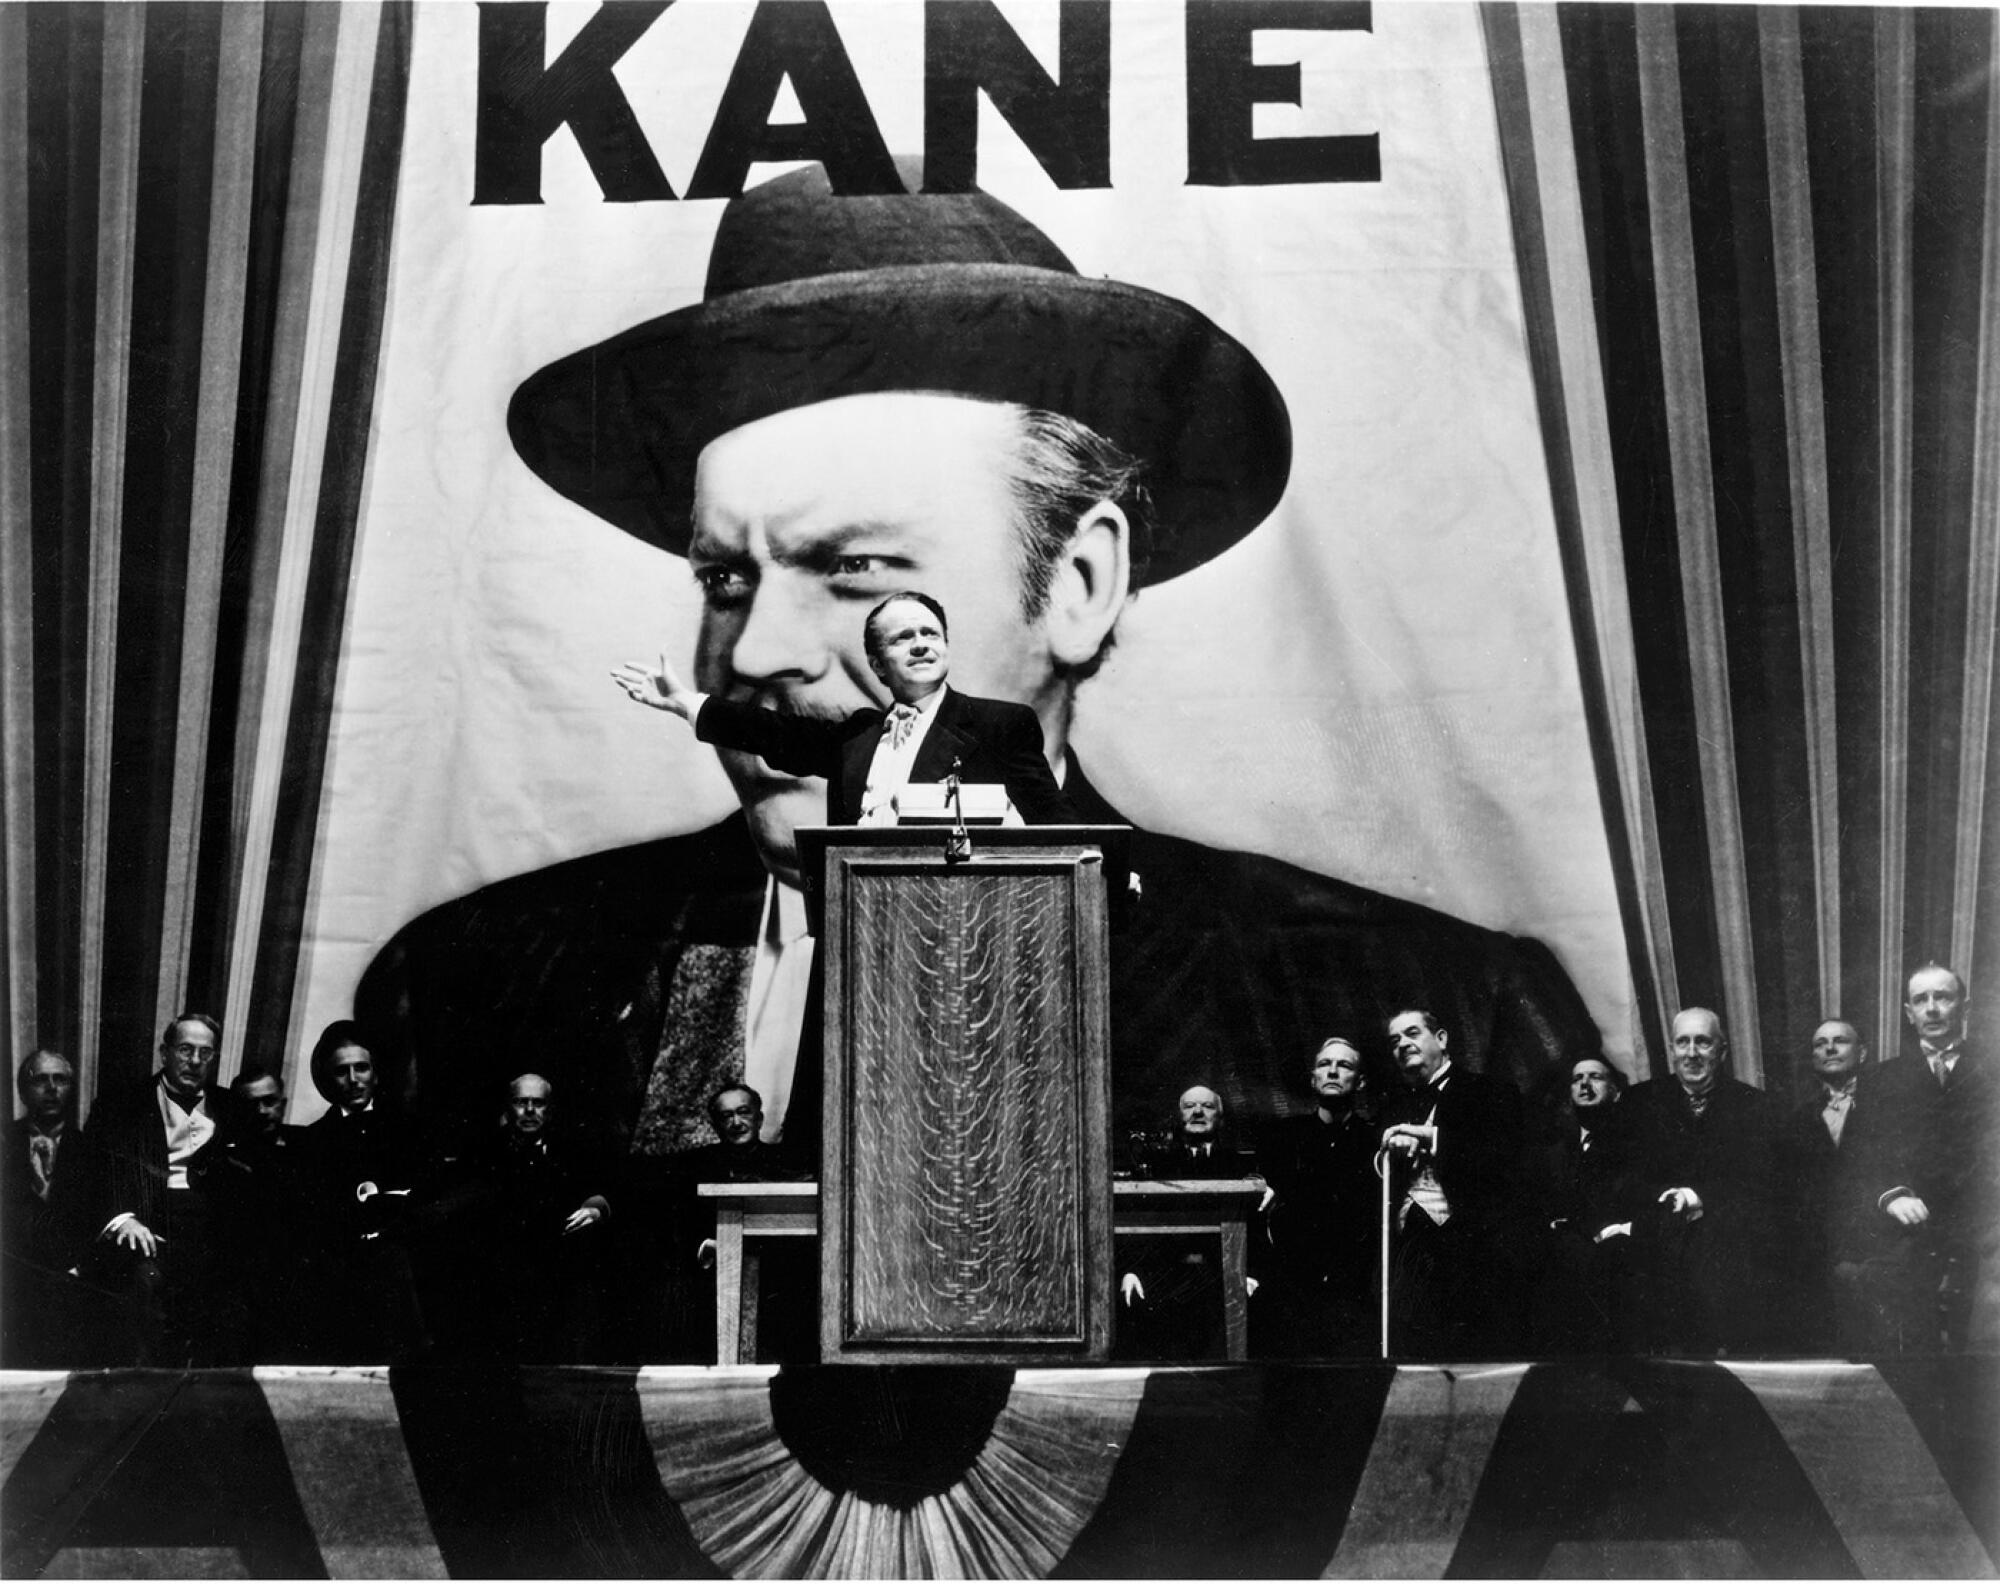 A man delivers a speech from a podium in front of a large picture of himself, marked KANE.